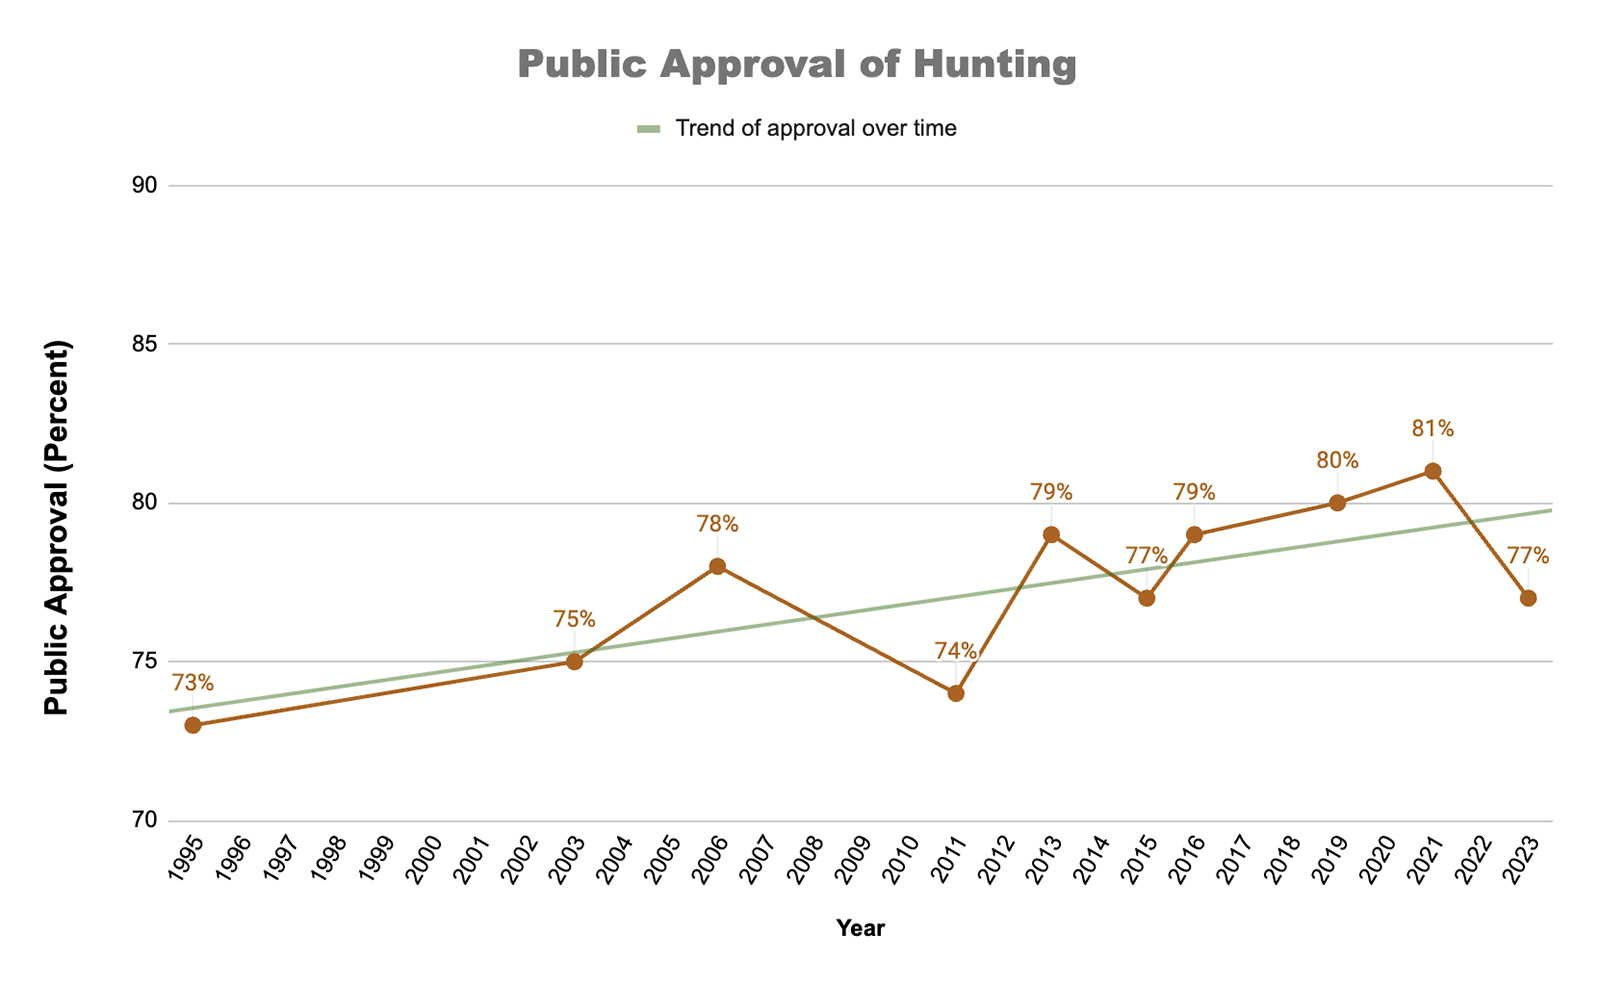 A graph showing public approval of hunting over time.